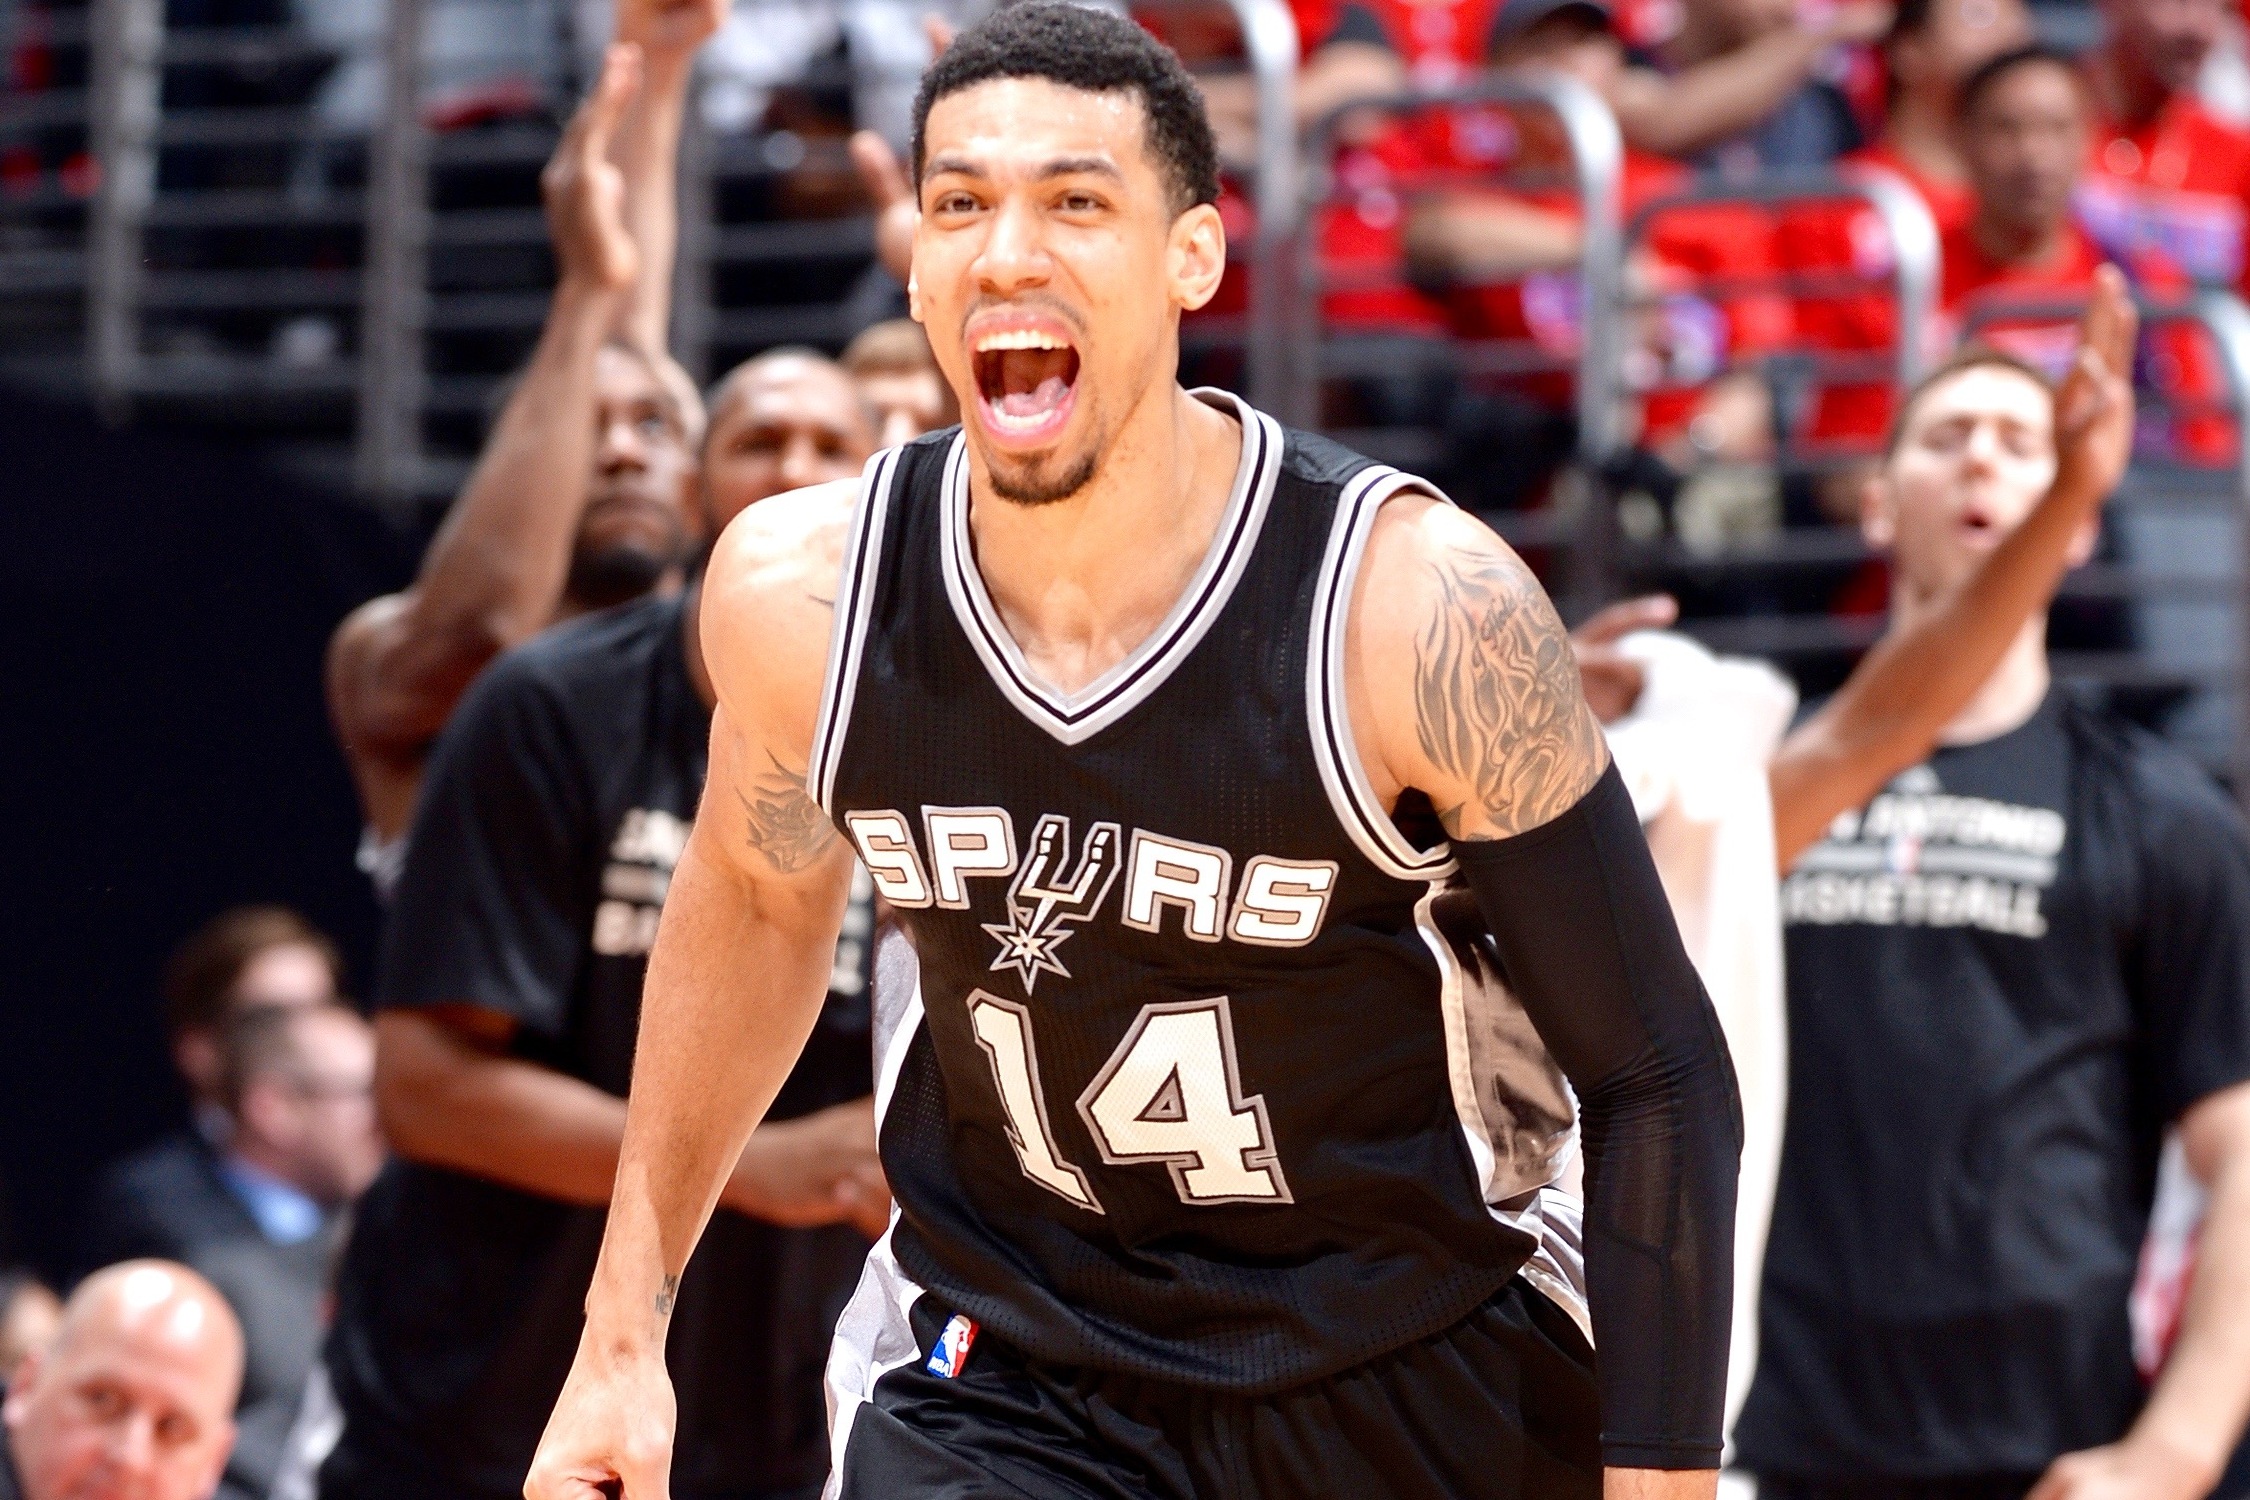 Danny Green signs with Spurs - NBA free agency grades - Sports